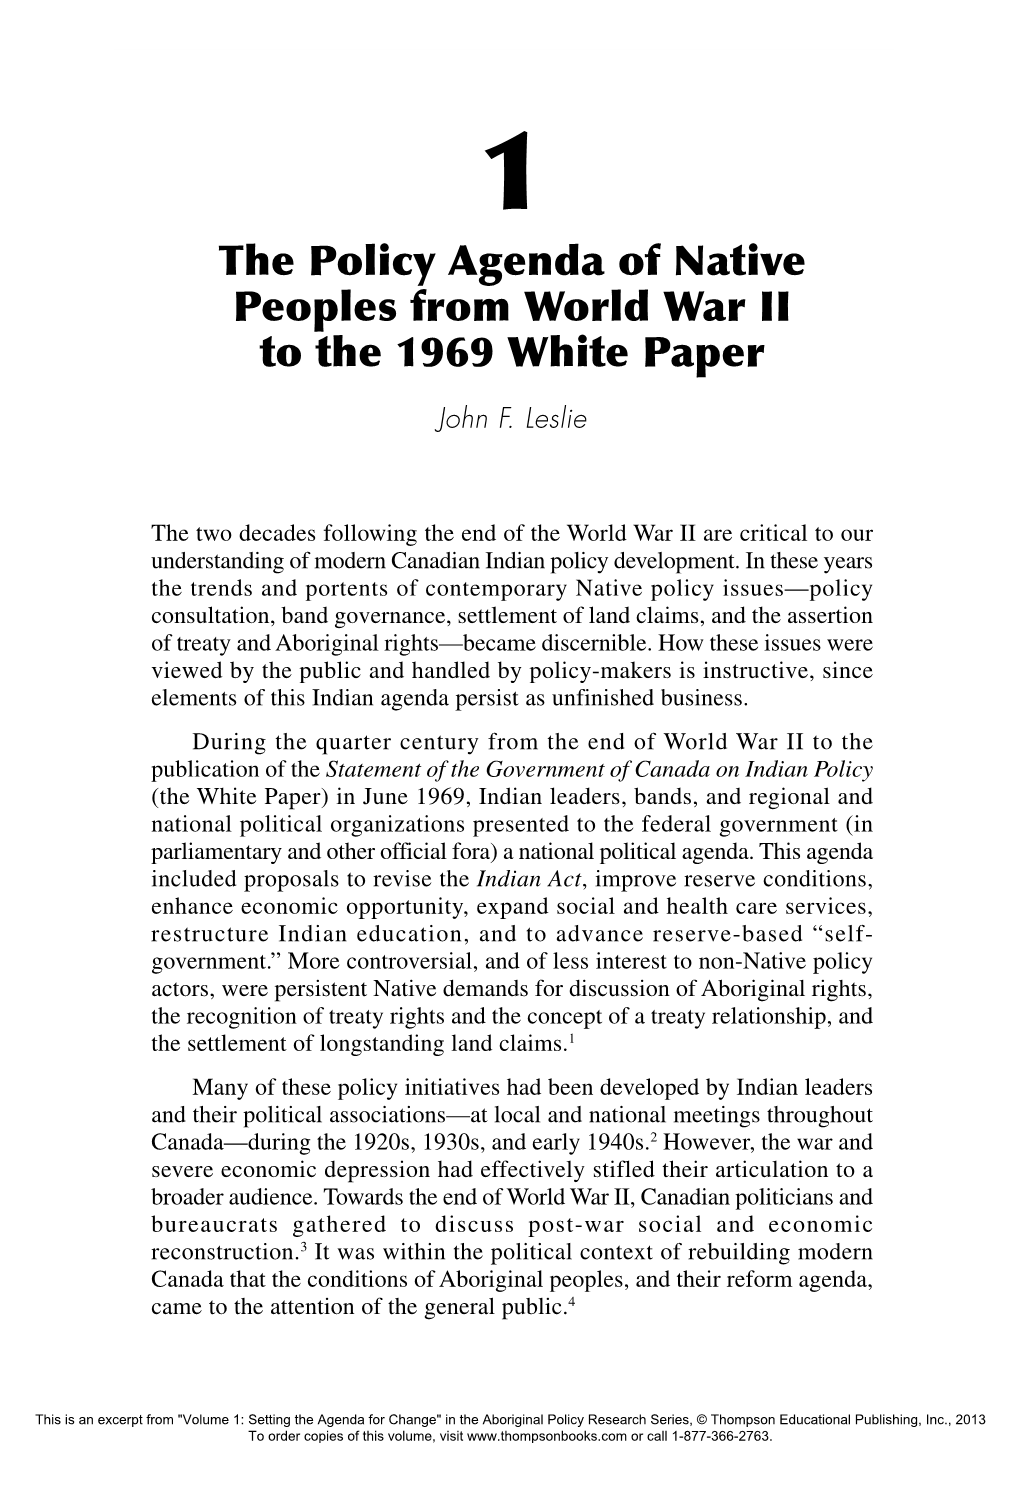 The Policy Agenda of Native Peoples from World War II to the 1969 White Paper